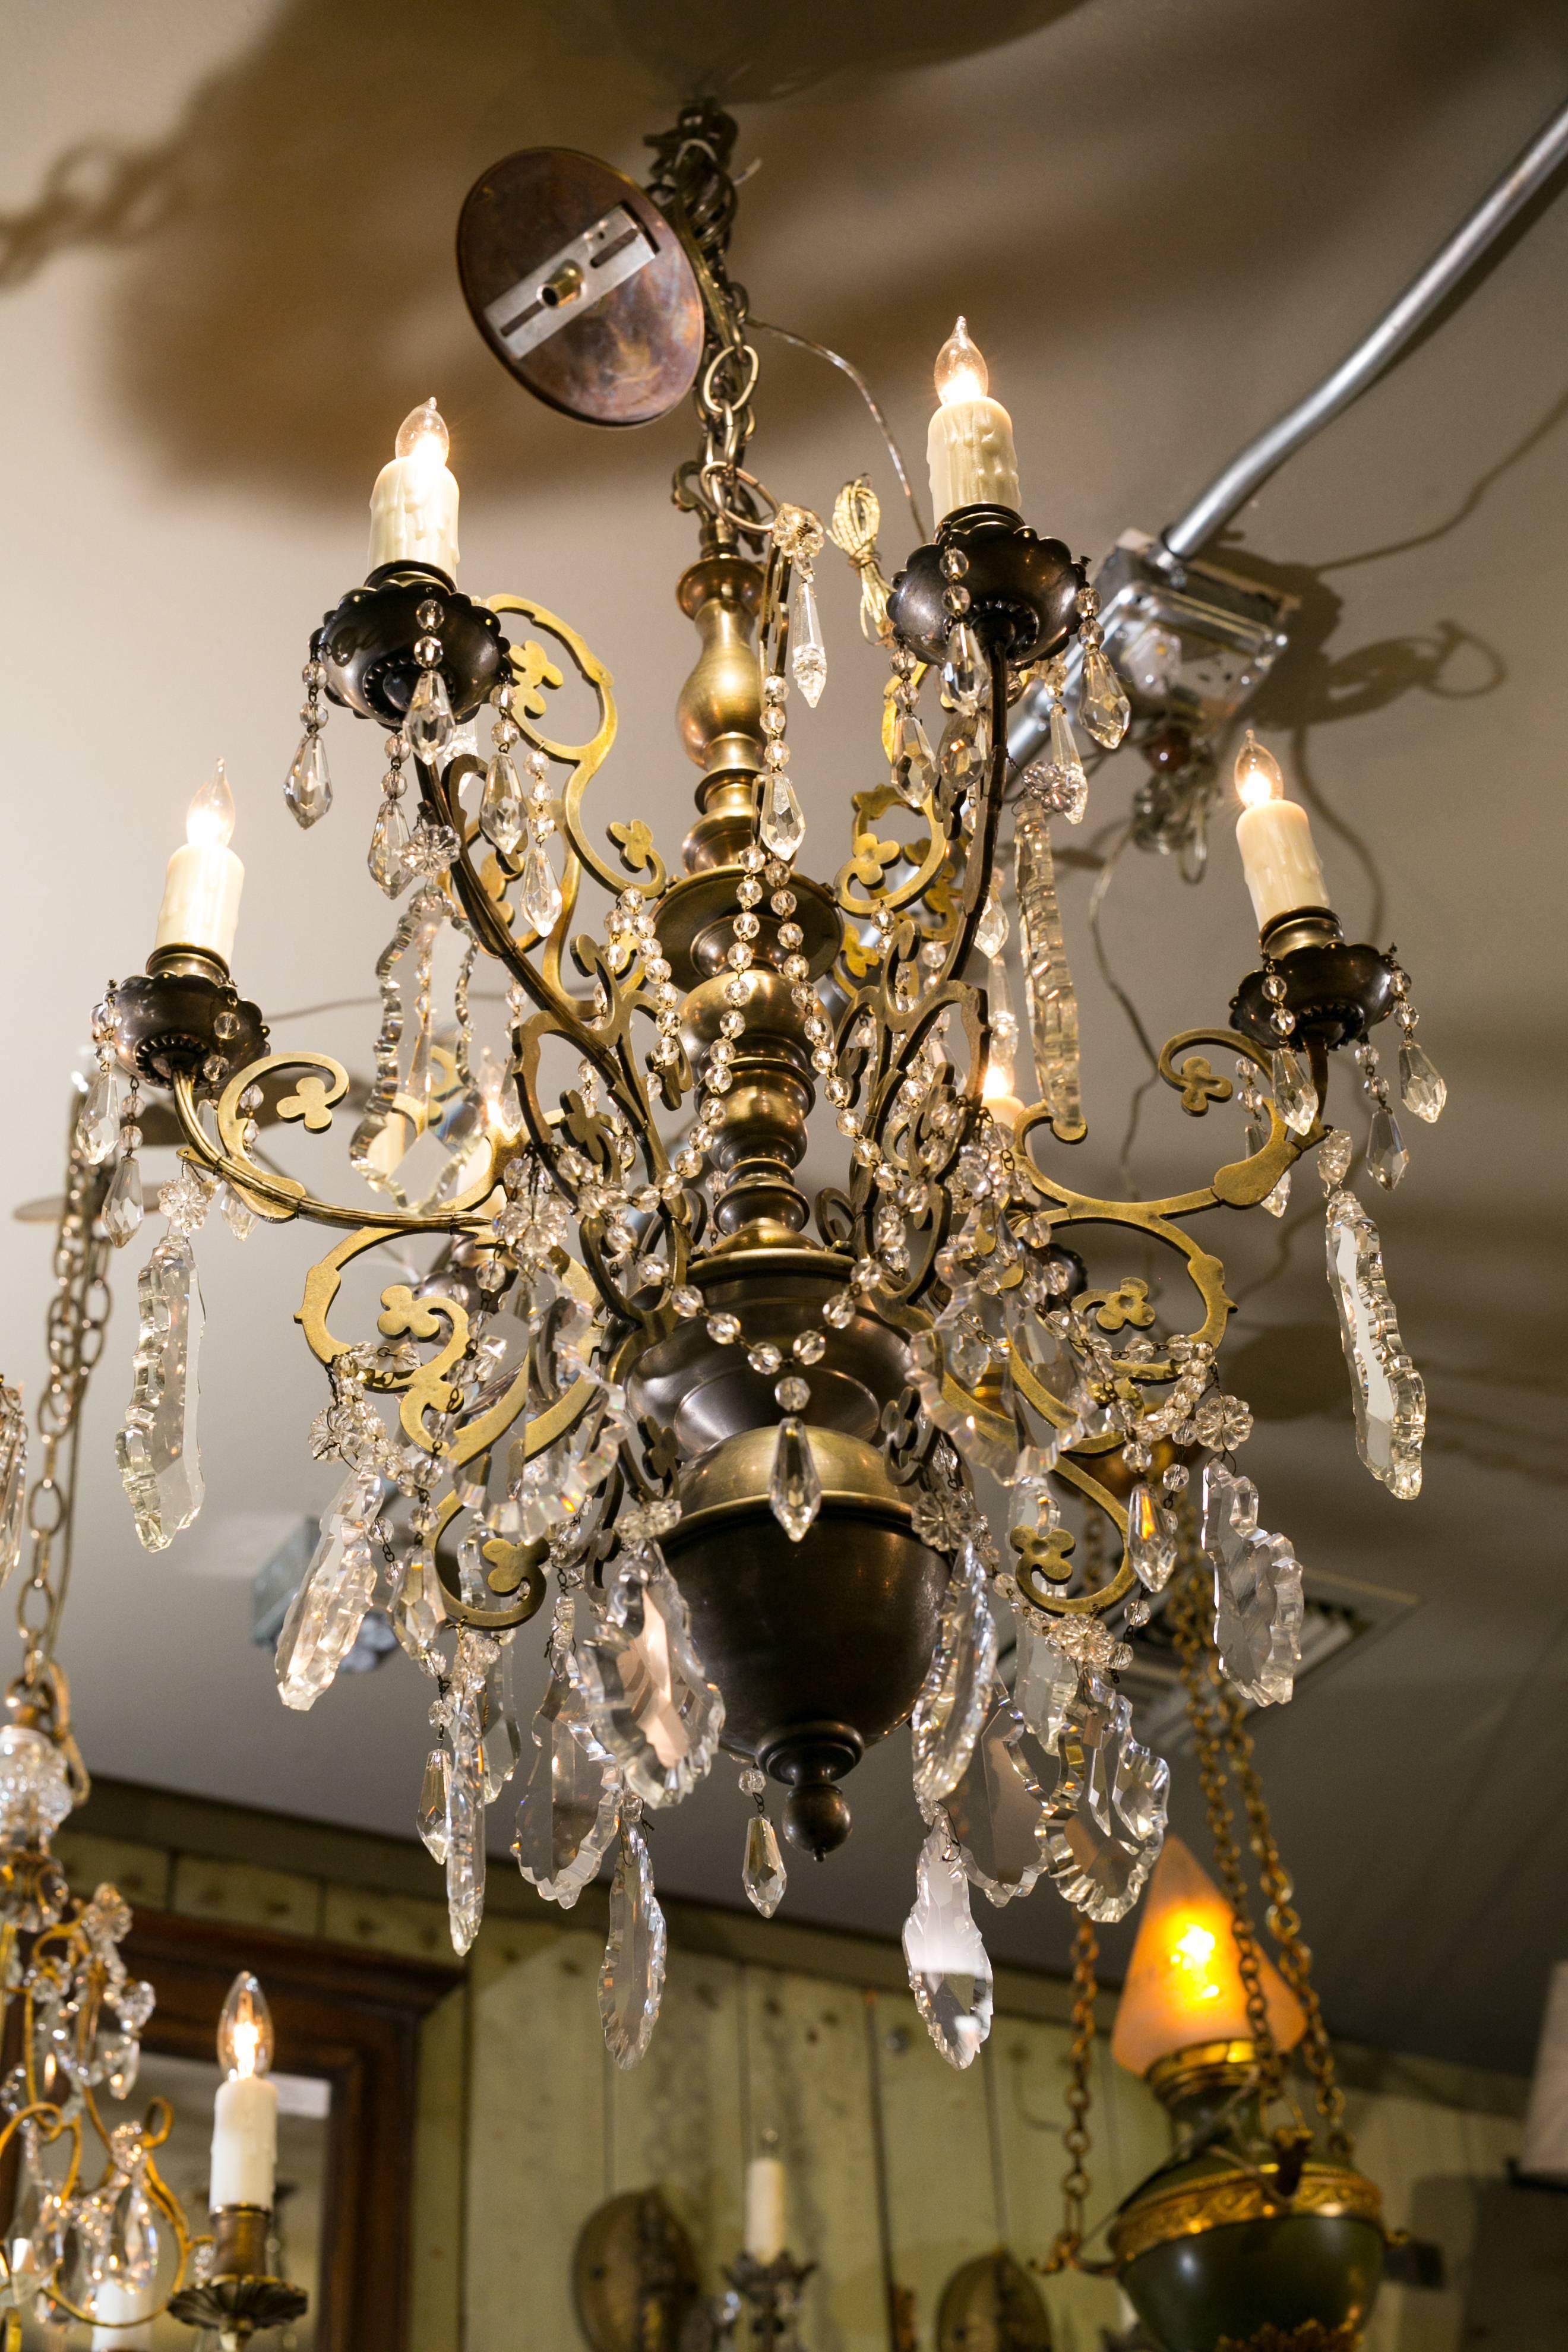 Belgian Pewter Colored Crystal Chandelier with Six Arms from Belgium, circa 1930